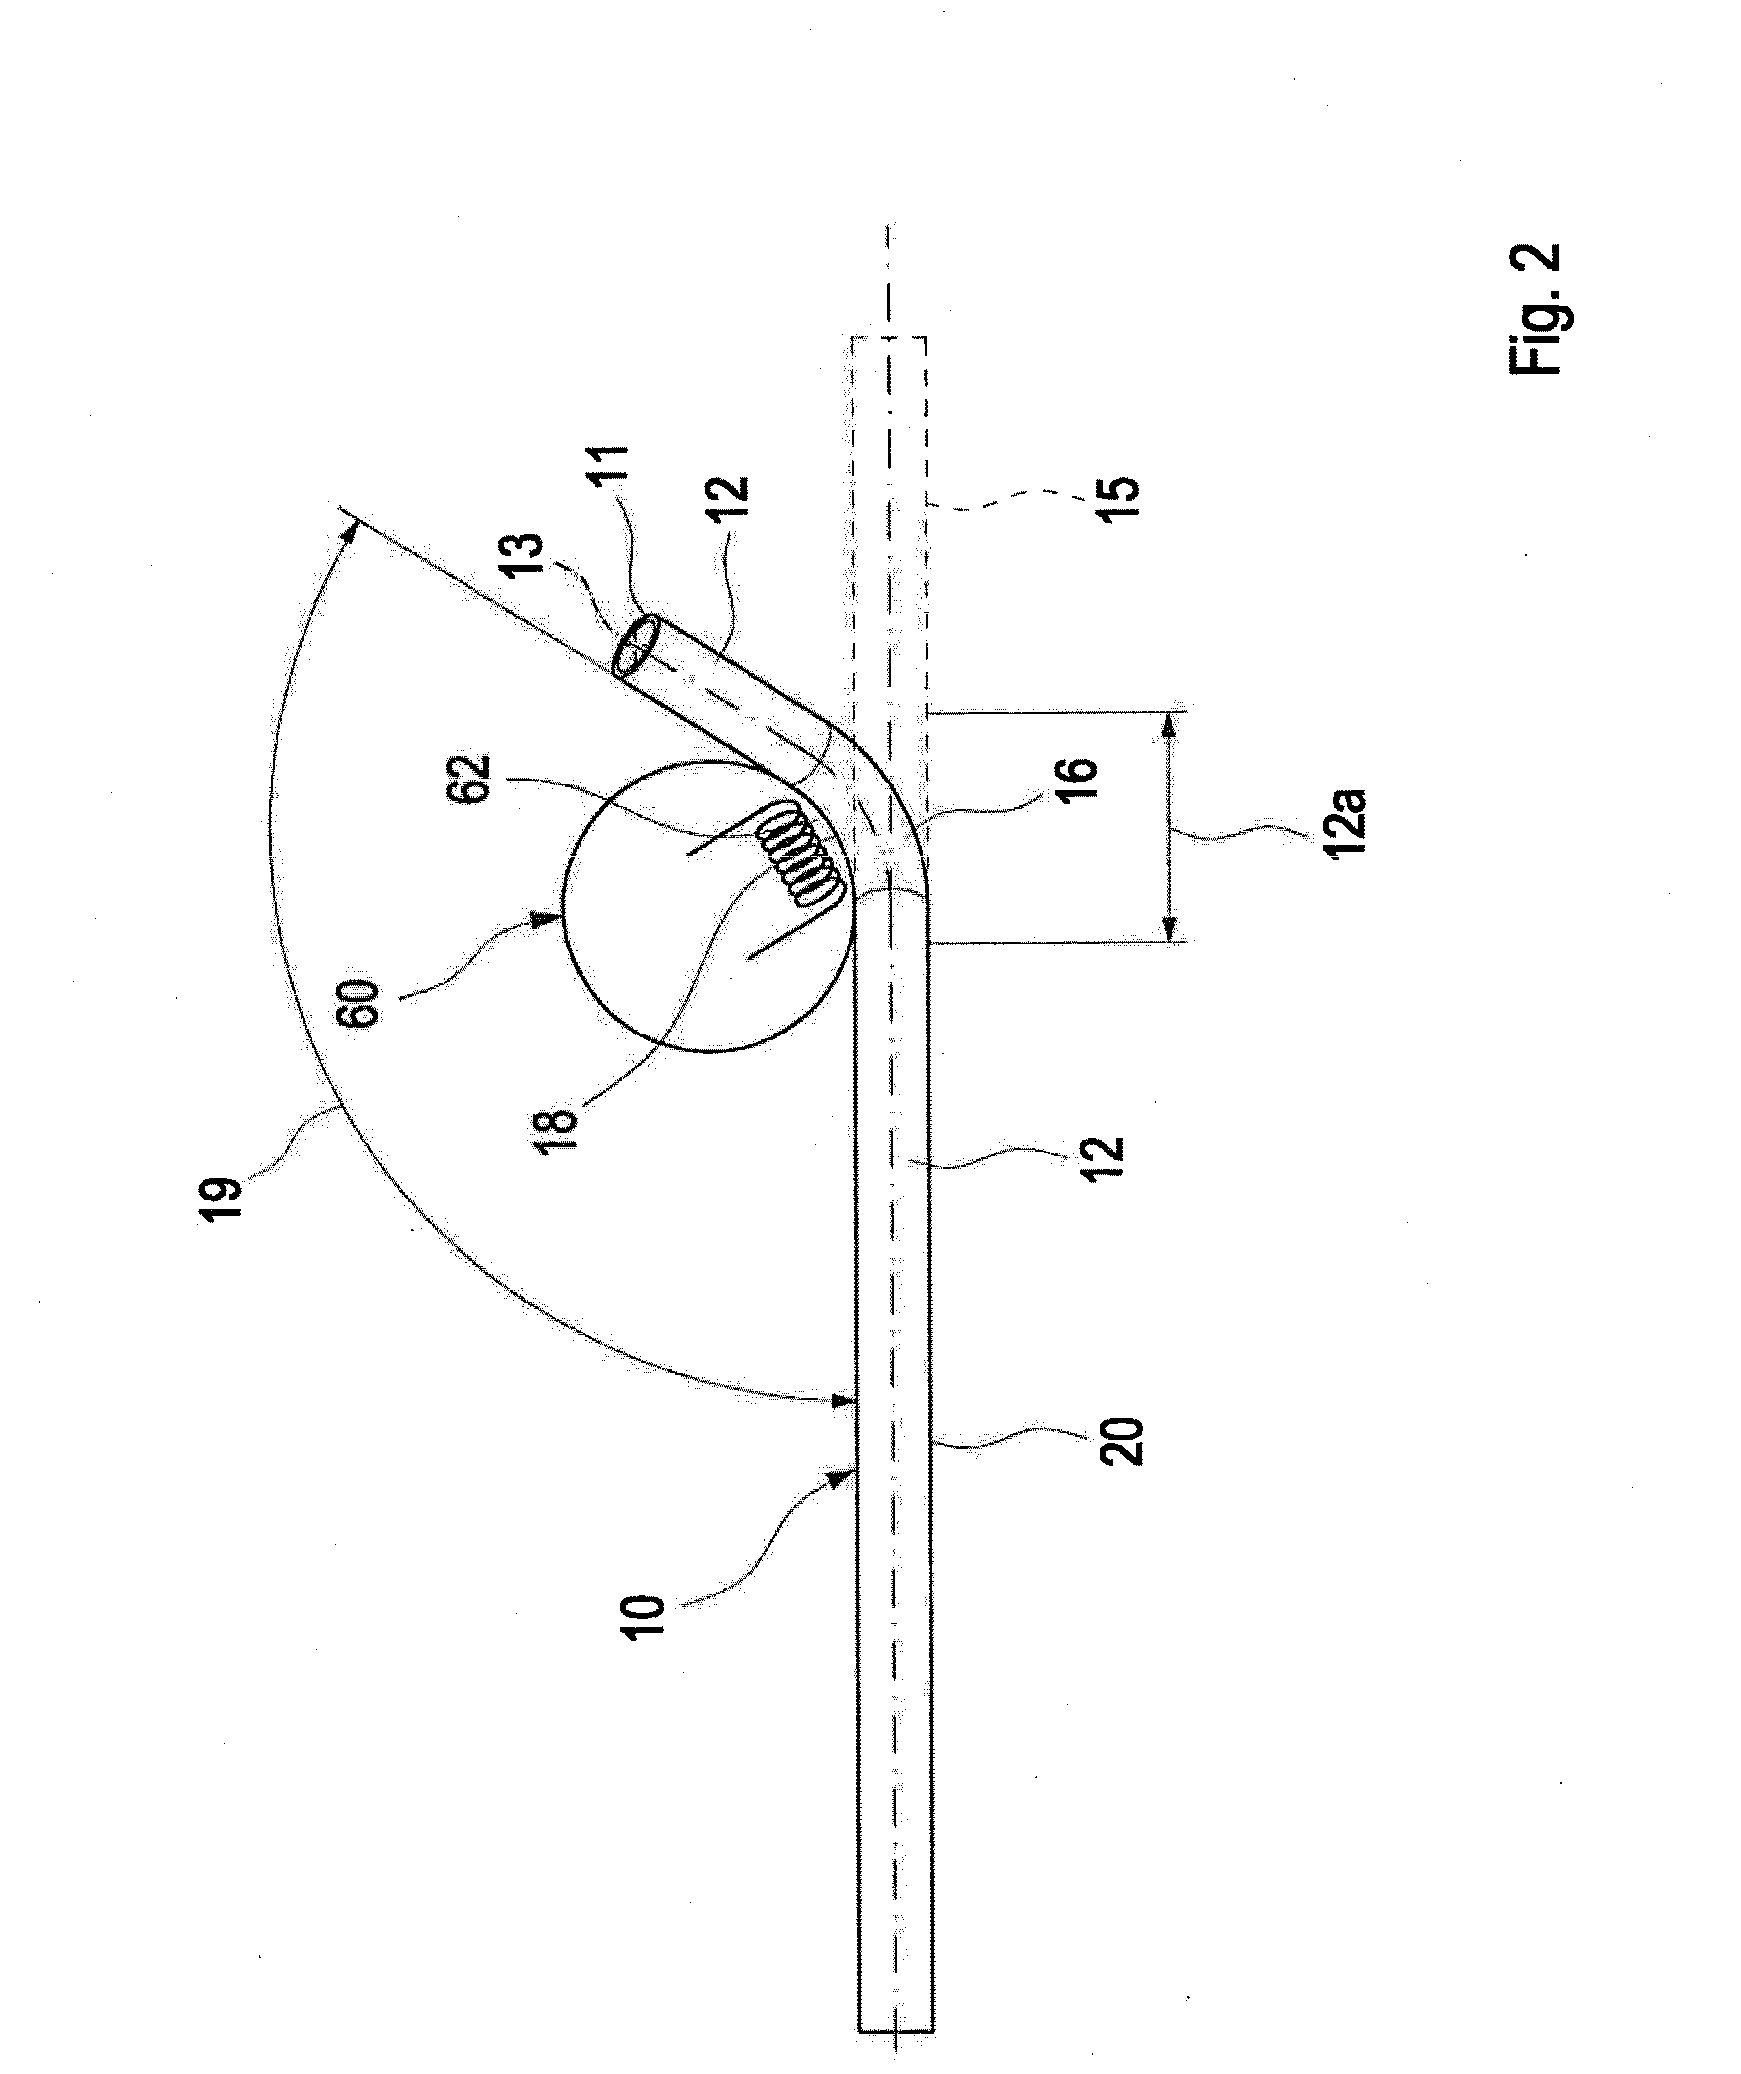 Method for bending thermoplastic pipes